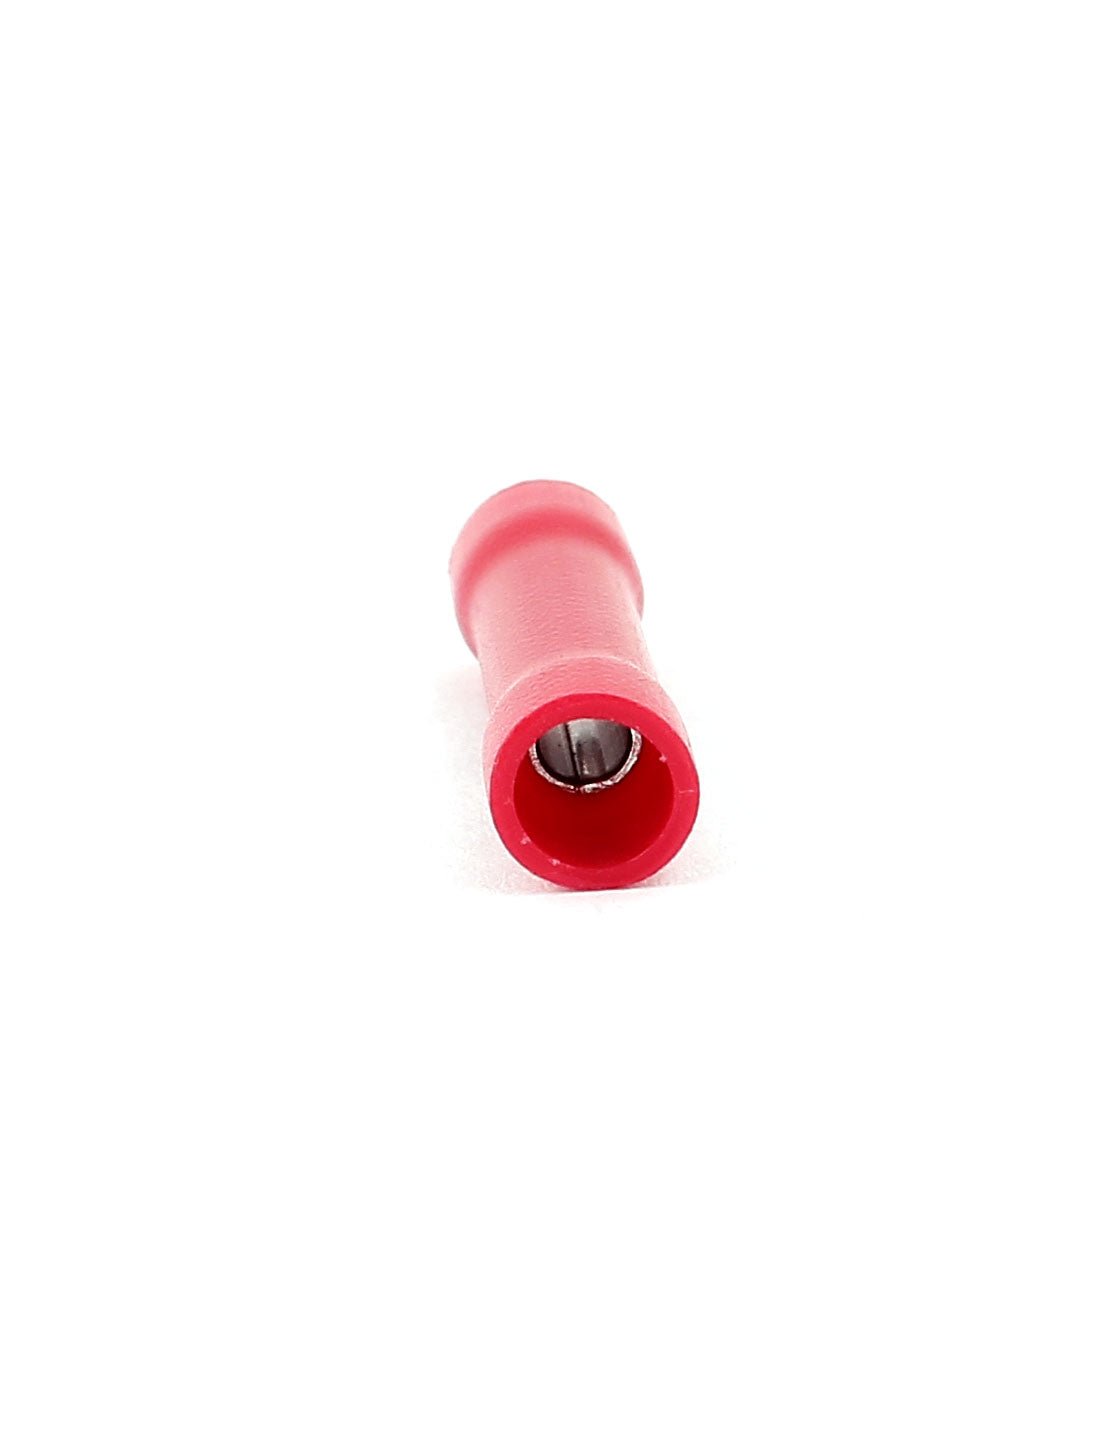 uxcell Uxcell 100Pcs Dual Ends Red Plastic Fully Insulated Female Crimp Wire Terminal Connector for AWG22-16